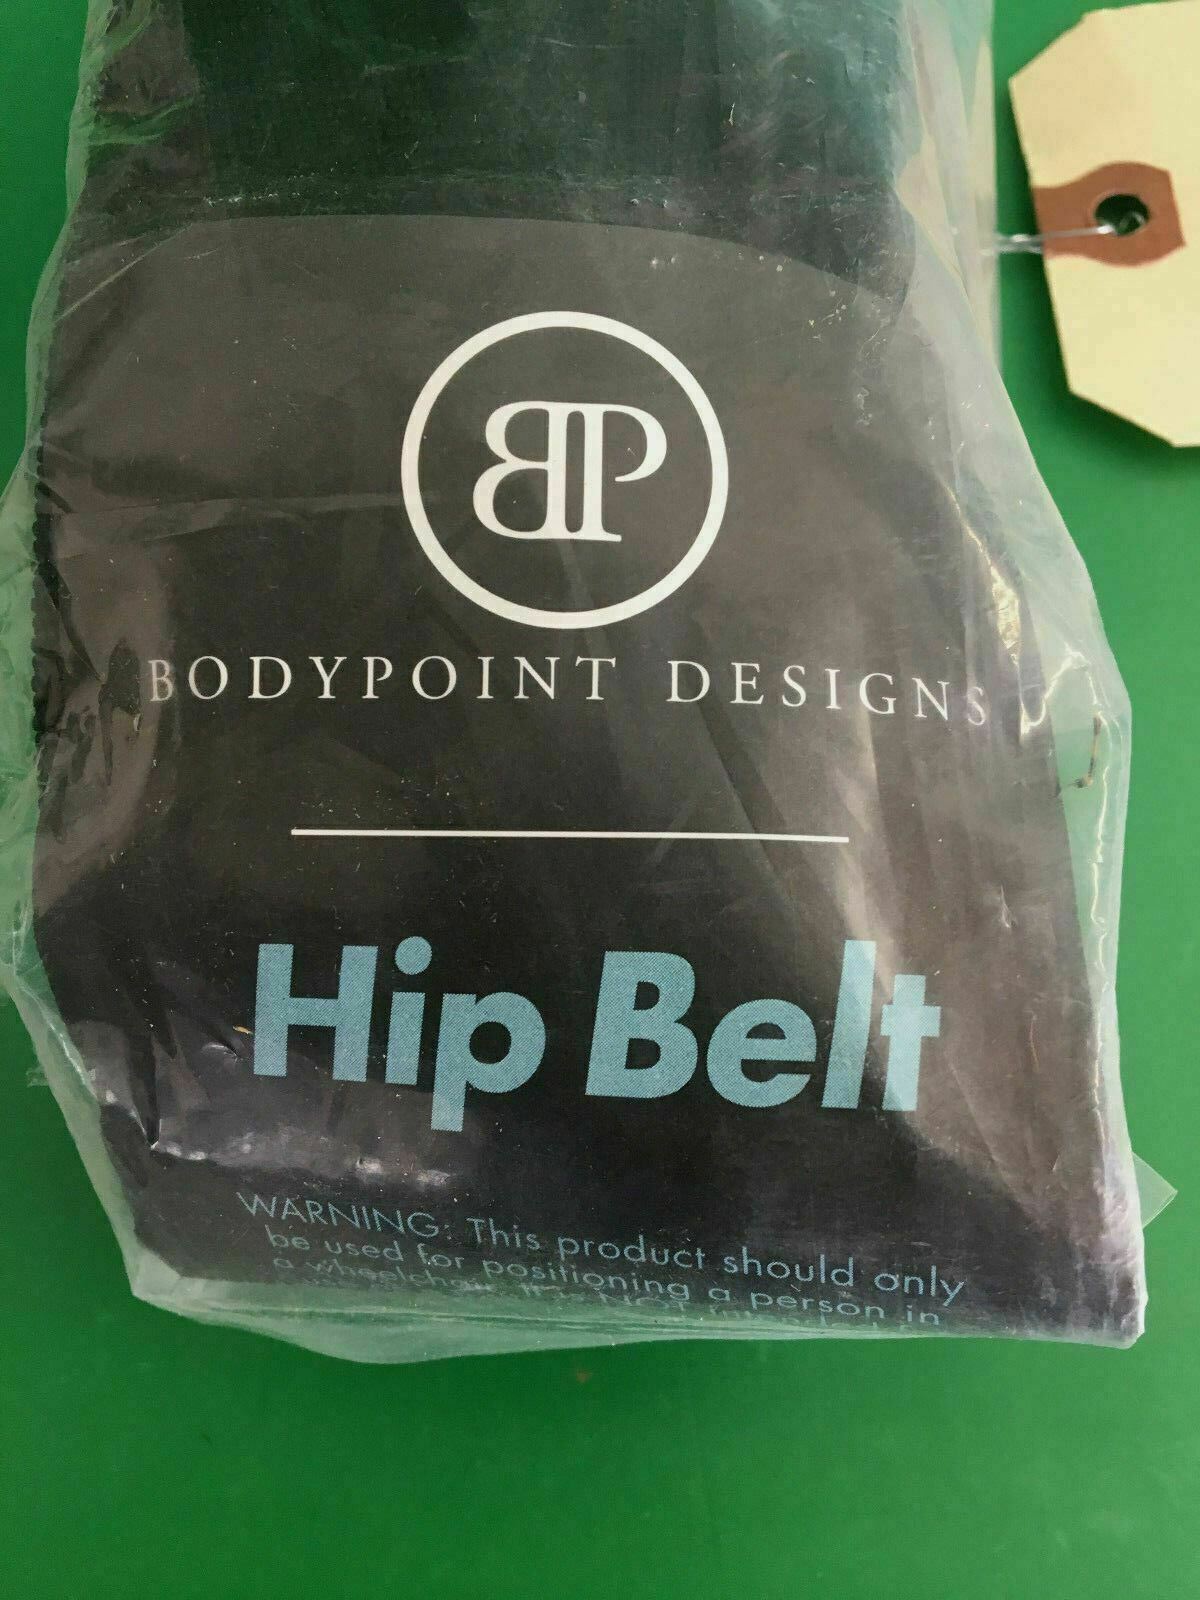 Bodypoint Hip Belt, Rear-Pull, SR, Small for Wheelchair (HB401) #B617